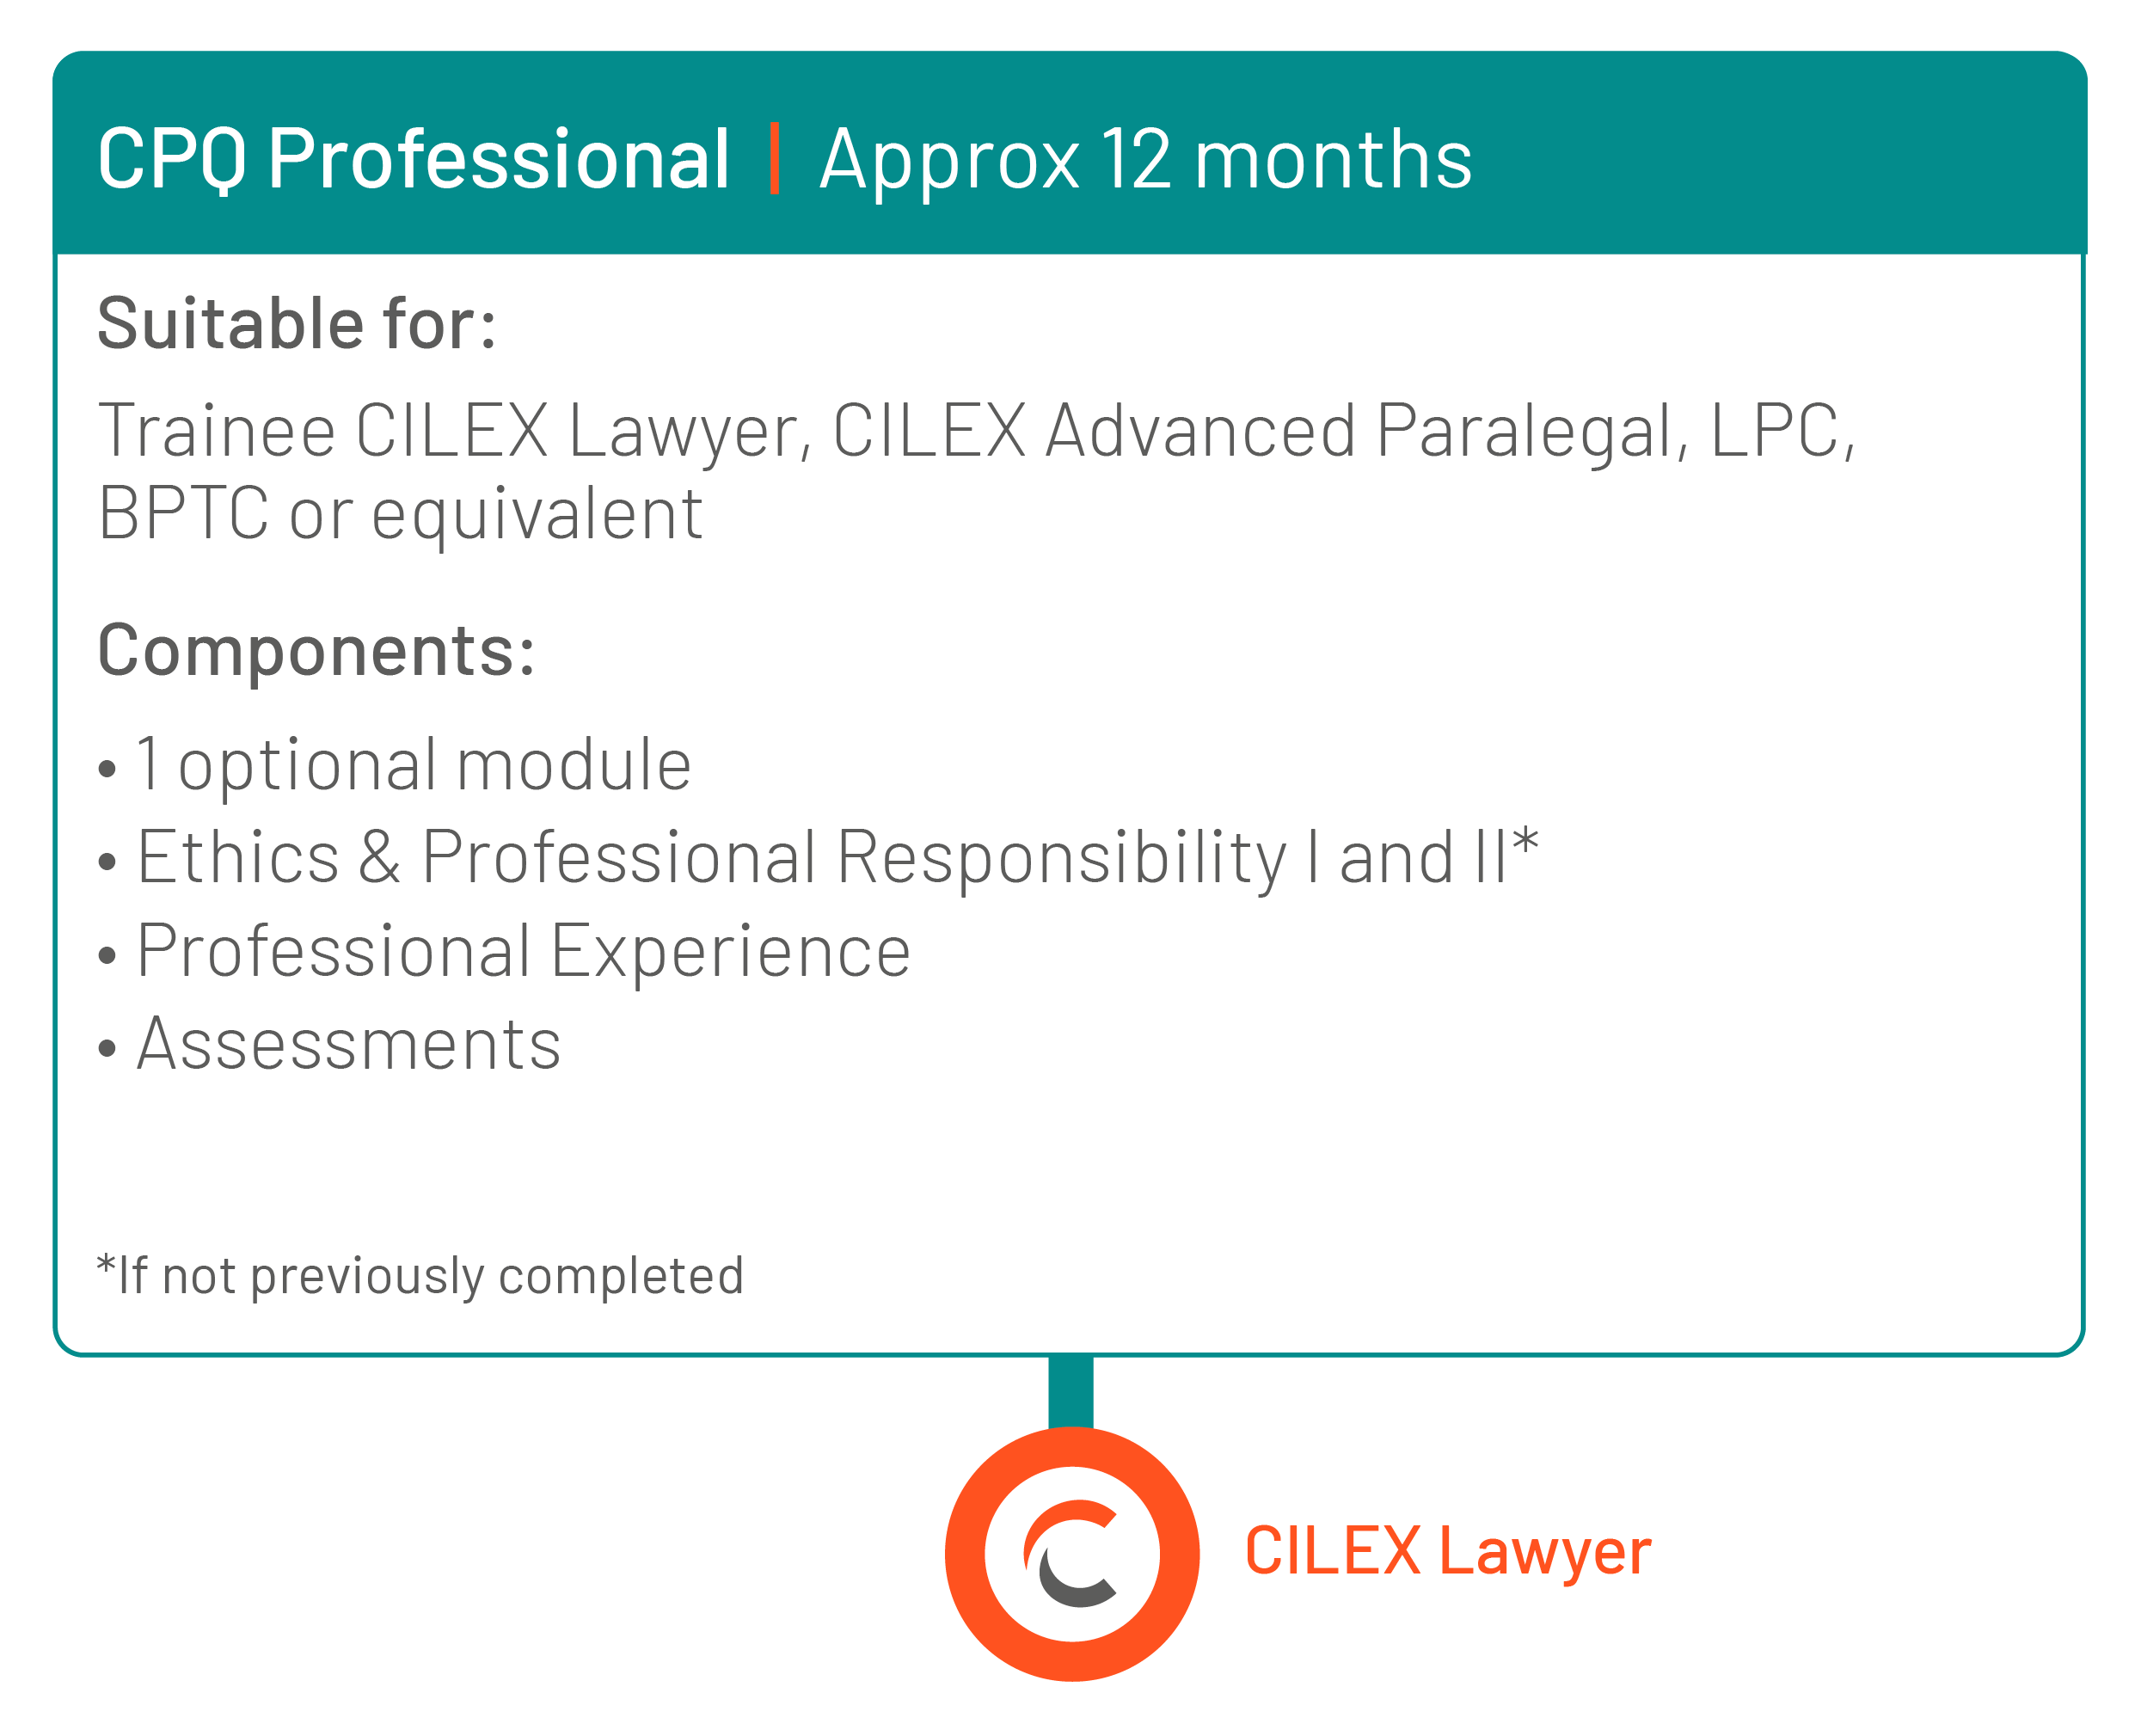 CPQ Professional - Approx 12 months. Suitable for: CILEX Trainee Lawyer, CILEX Advanced Paralegal, LPC, BPTC or equivalent. Components: 1 optional module, Ethics & Professional Responsibility 1 and 2 (if not previously completed), Professional Experience, Assessments. Outcome: CILEX Lawyer.